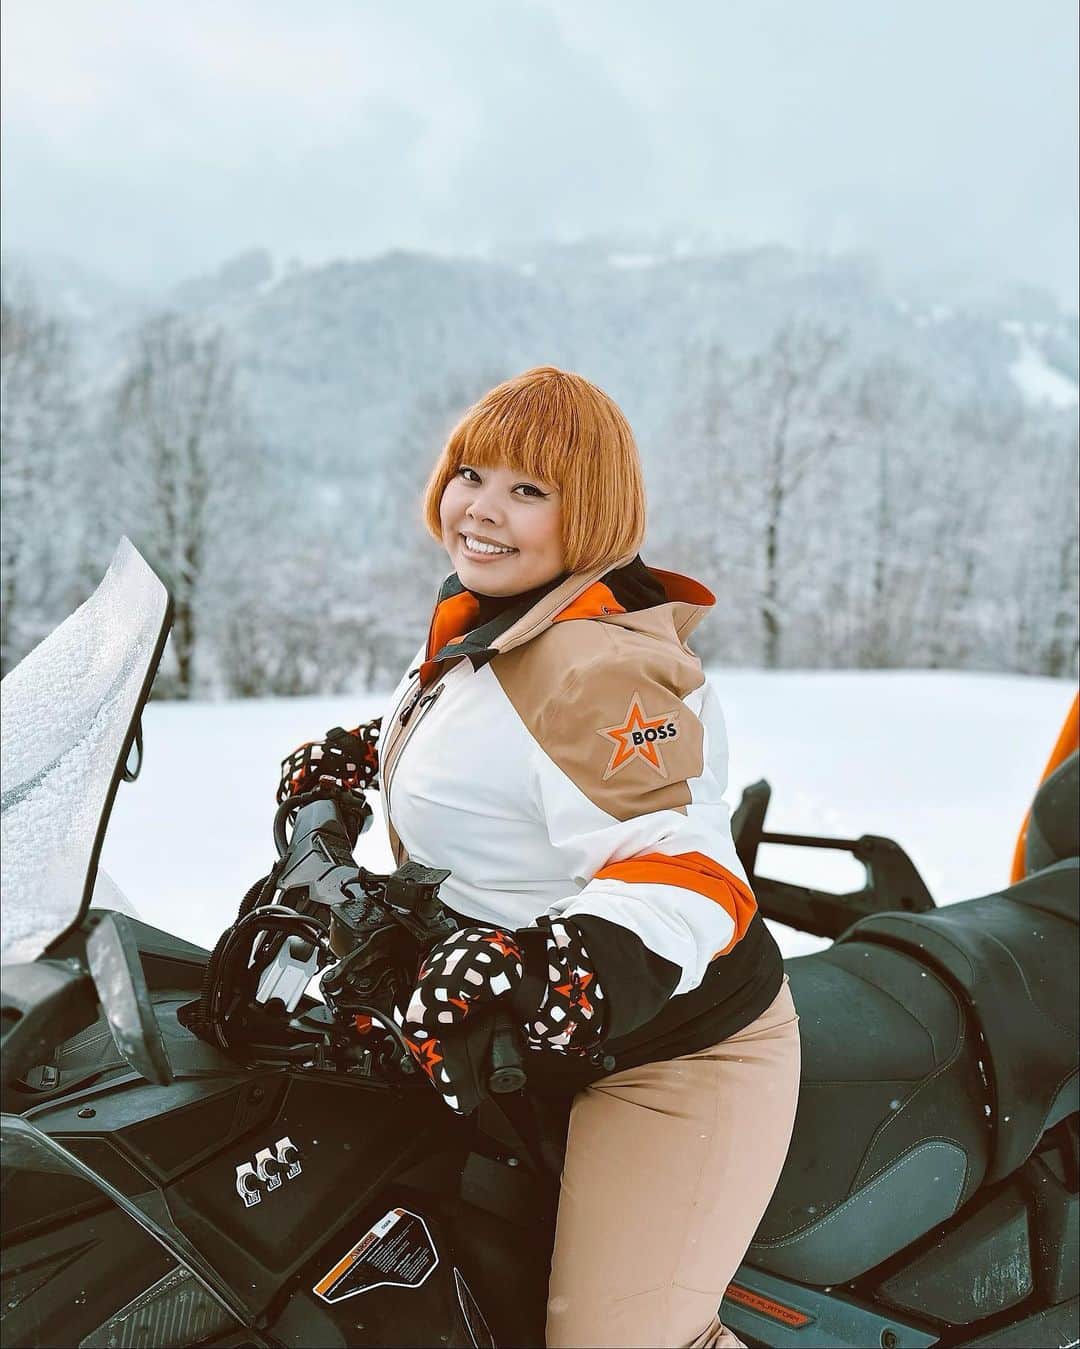 渡辺直美のインスタグラム：「初めてのアルプス山脈でスキー⛷️ @boss 素敵な経験をありがとうございます！！ 色んな撮影をしたよ！BOSSアカウントから動画見れます！ 私だけ他の動画と毛色違ってコントしてて草にょ  初オーストリア、キッツビューエル！ 歴史あるアルペンスキーの世界大会が行われる都市だにょ！ 大会も間近で見たし、ここでスキー出来たのもマジ感動…  ちなみに中3が私の初めてのスキー体験で、その時猛スピードで森に突っ込んで即終了したんだよねw それ以来のスキー体験だったけど、今回はとっっっても楽しいスキーが出来ました！笑　恐れずに挑戦したら新しい扉が開いたにょ！次はスノボーにも挑戦したい🥹可愛いウェアでさらにテンションうにょ！  素敵なパーティーとスキー大会表彰式ディナーは優しい仲間達のおかげで根暗なおちゃん元気に過ごせましたwwみんな優しいw  First time skiing in the Alps Thank you @boss for a great experience!  Kitzbuhel, Austria! I was honored to be able to ski at the legendary place where the Alpine Ski World Cup takes place!   We took some amazing videos too so please check out @boss 's reel! It's a 70's ski love story...  and check my baby-level skiing! lol   It was the first time since 9th grade when I skiied for the first time and ran into the trees at full speed , but it was a suuuper fun time this time! lol I was able to open a new door as I challeneged myself, putting my fears aside, and it was especially fun with thew cute outfit💓  @boss  #beyourownboss」